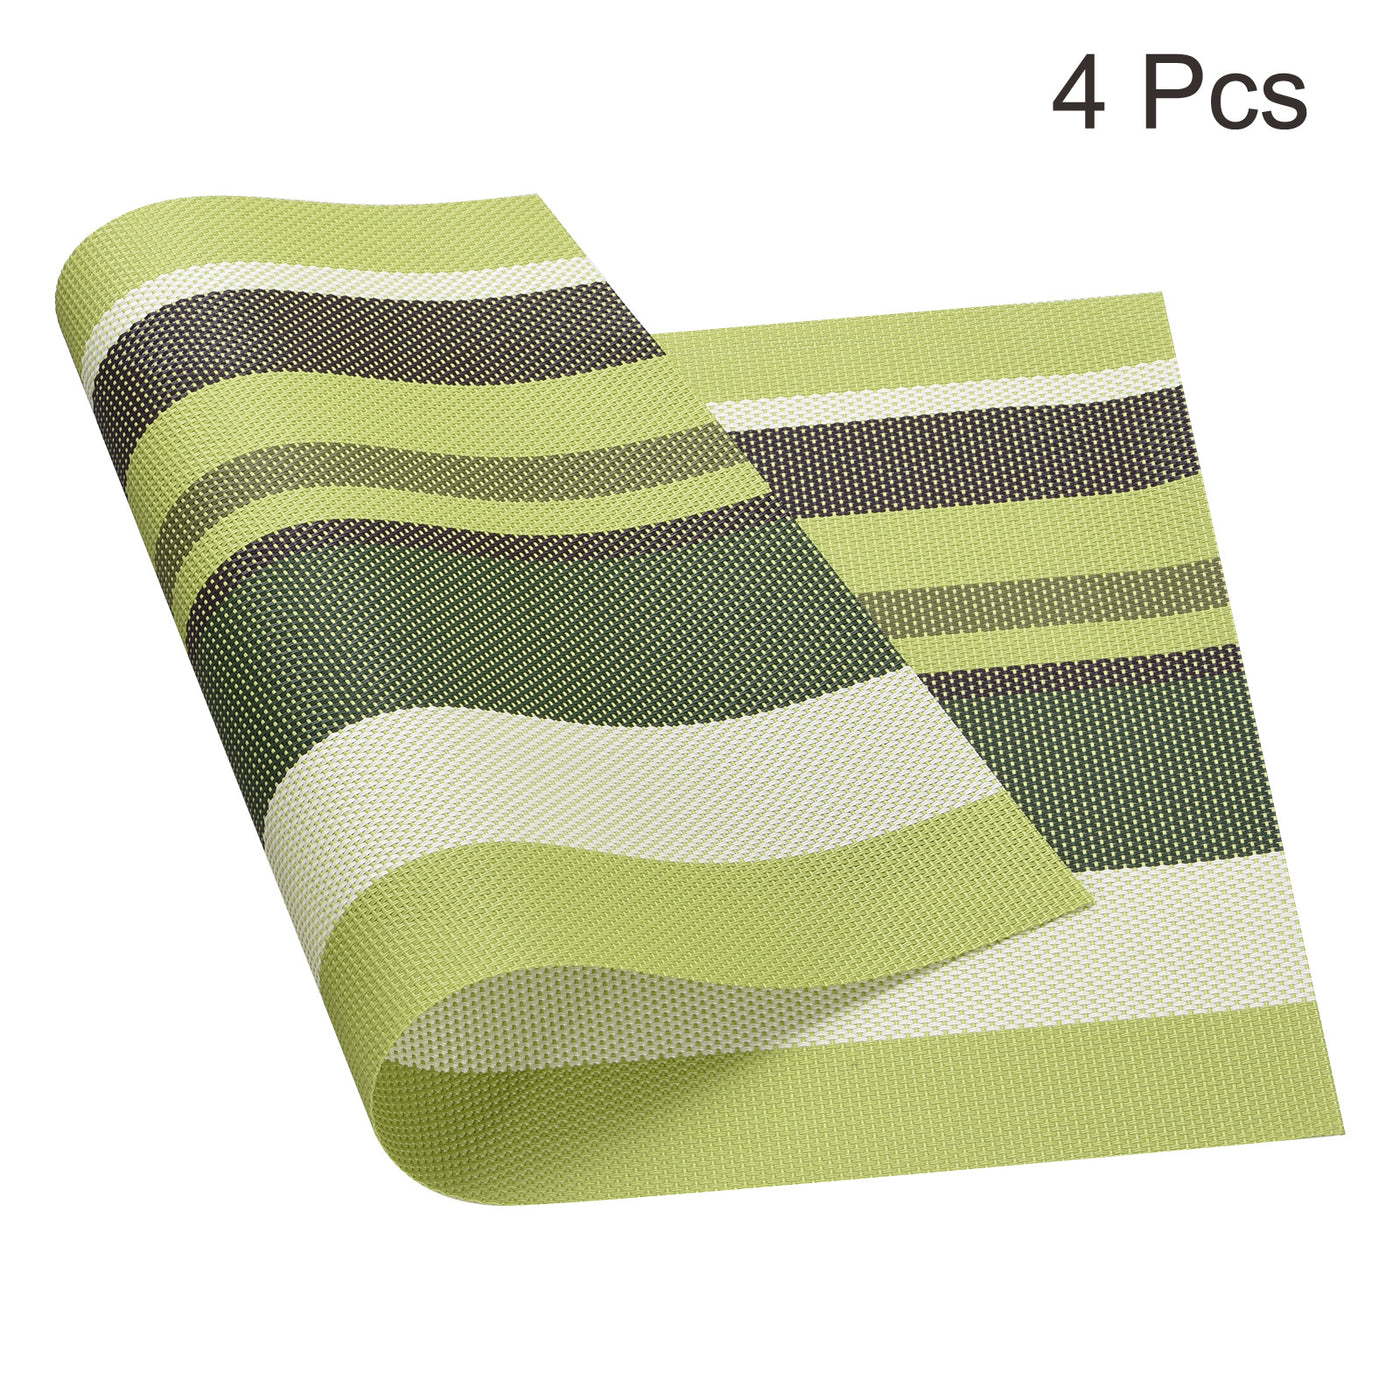 uxcell Uxcell Place Mats 450x300mm 4pcs PVC Table Washable Woven Placemat, Stripe Green